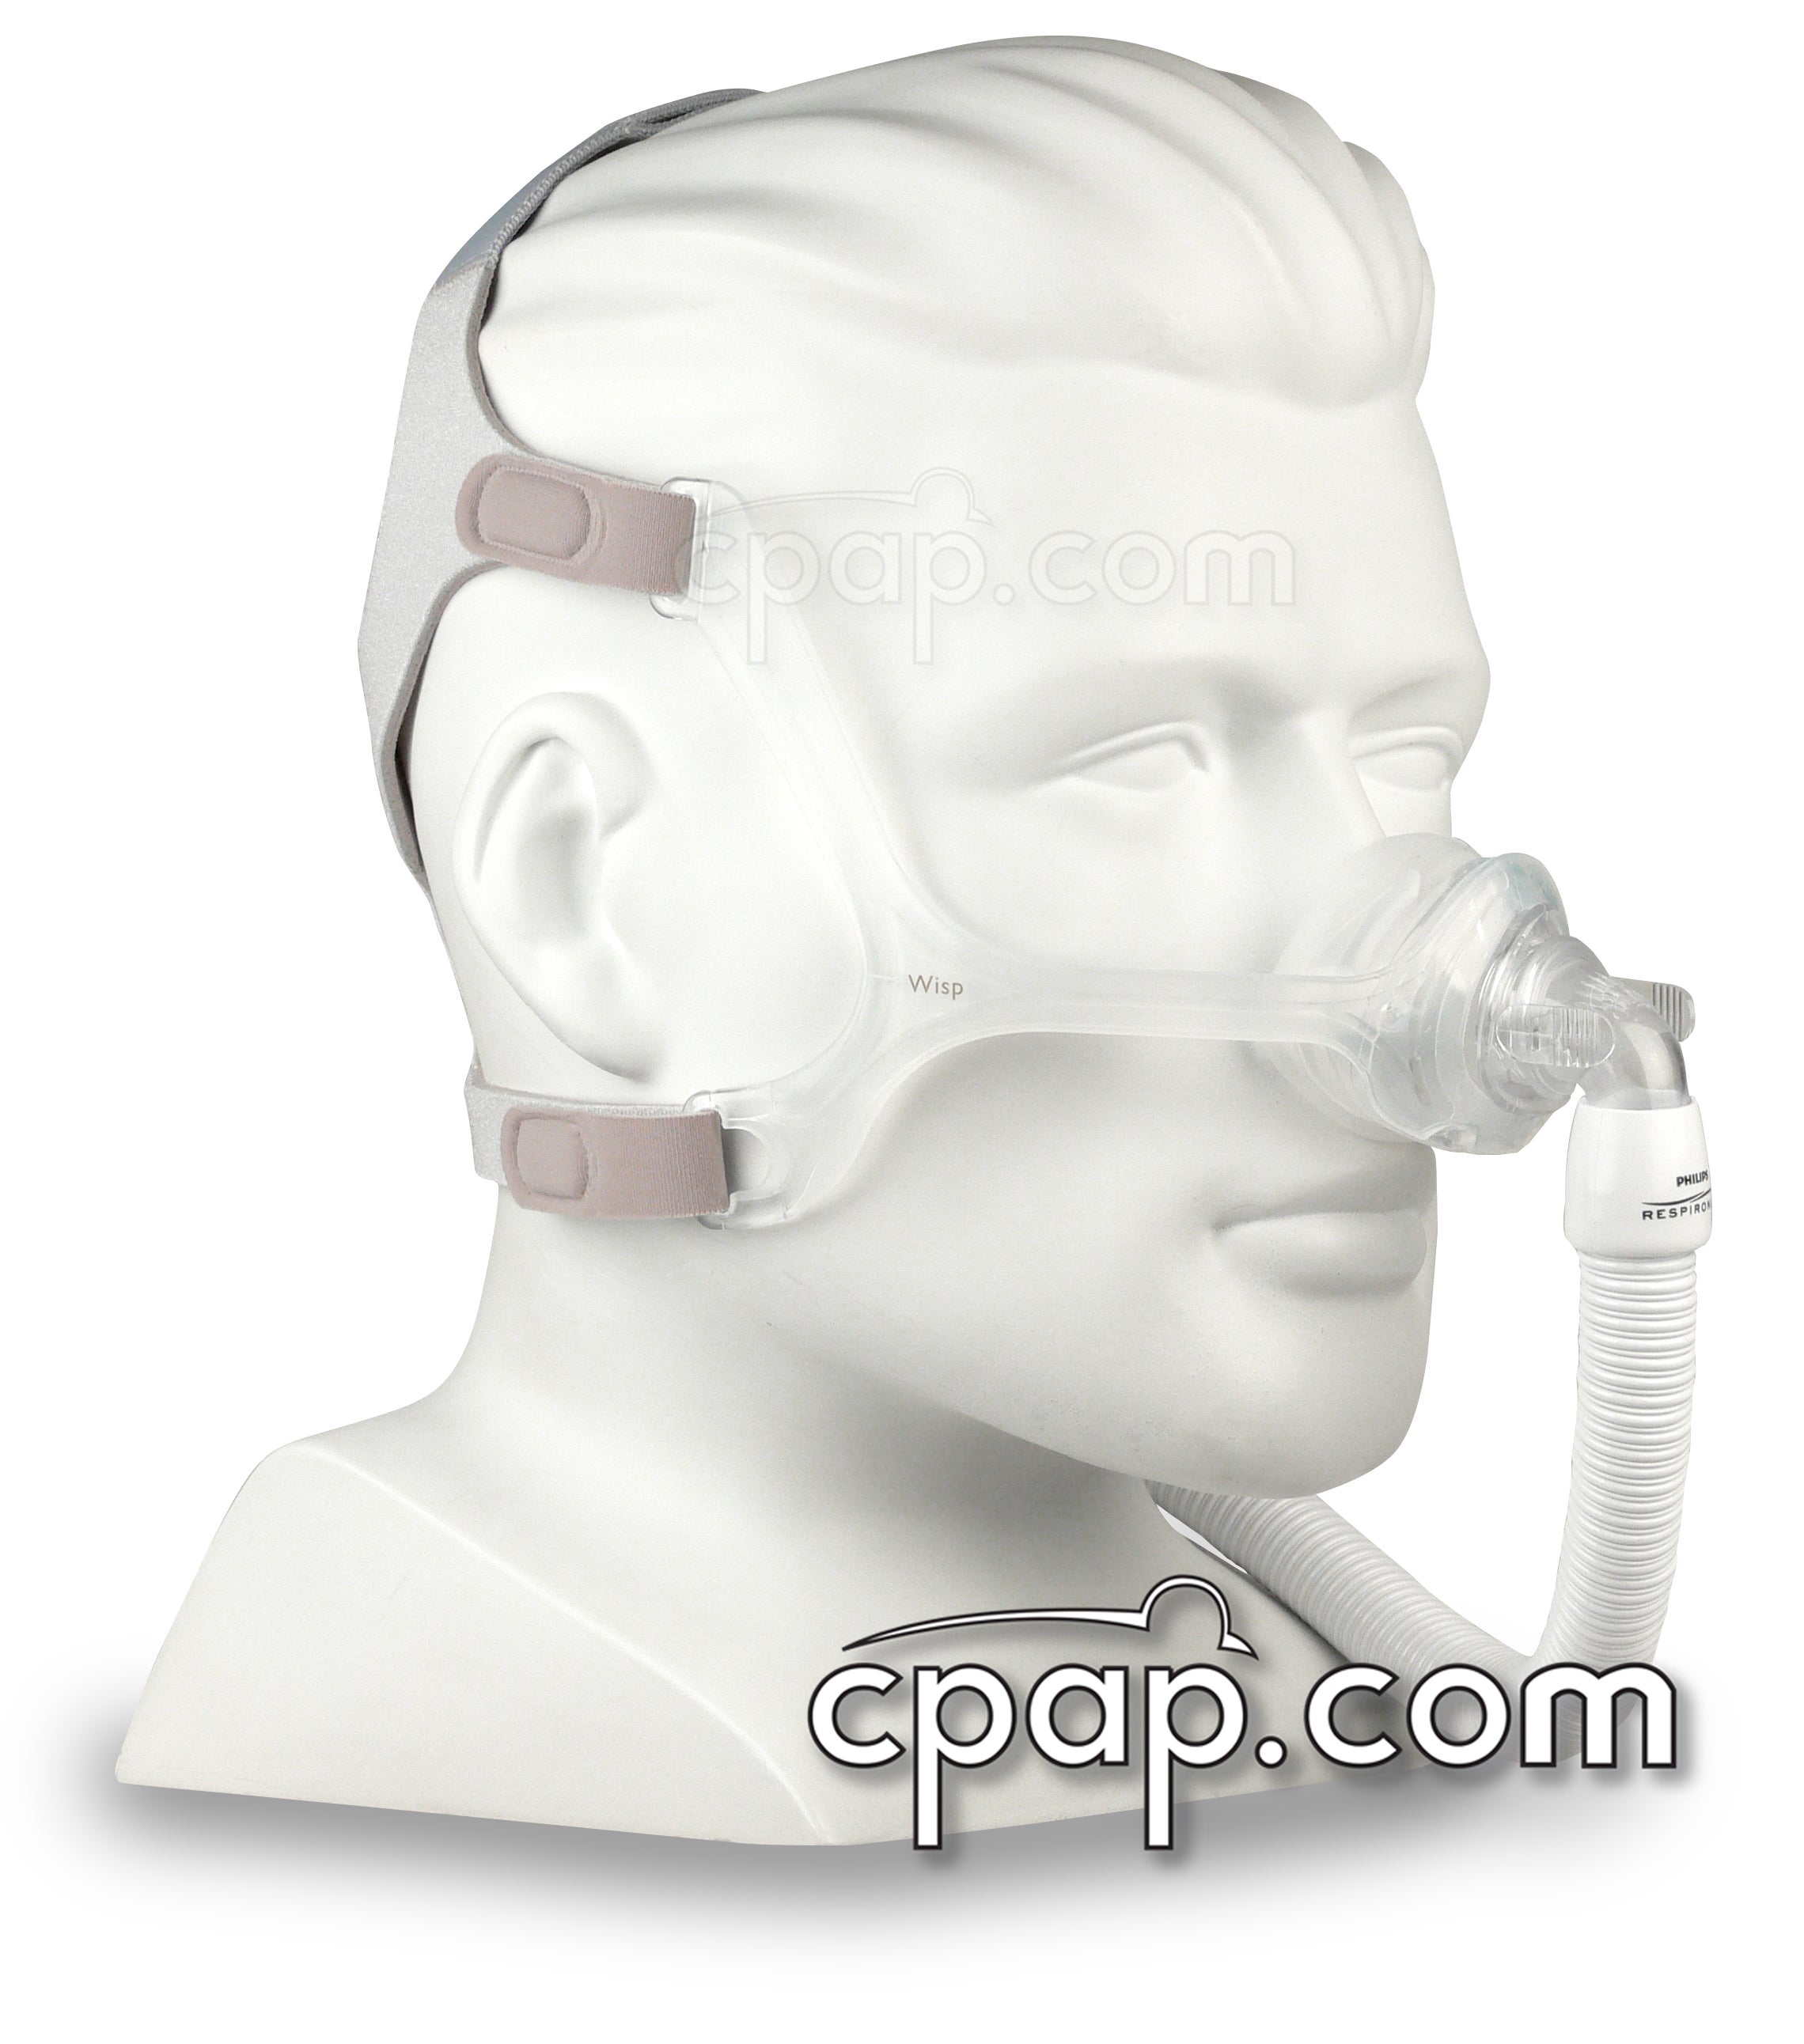 Philips Respironics Wisp Nasal Cpap Mask With Headgear Fit Pack 5975